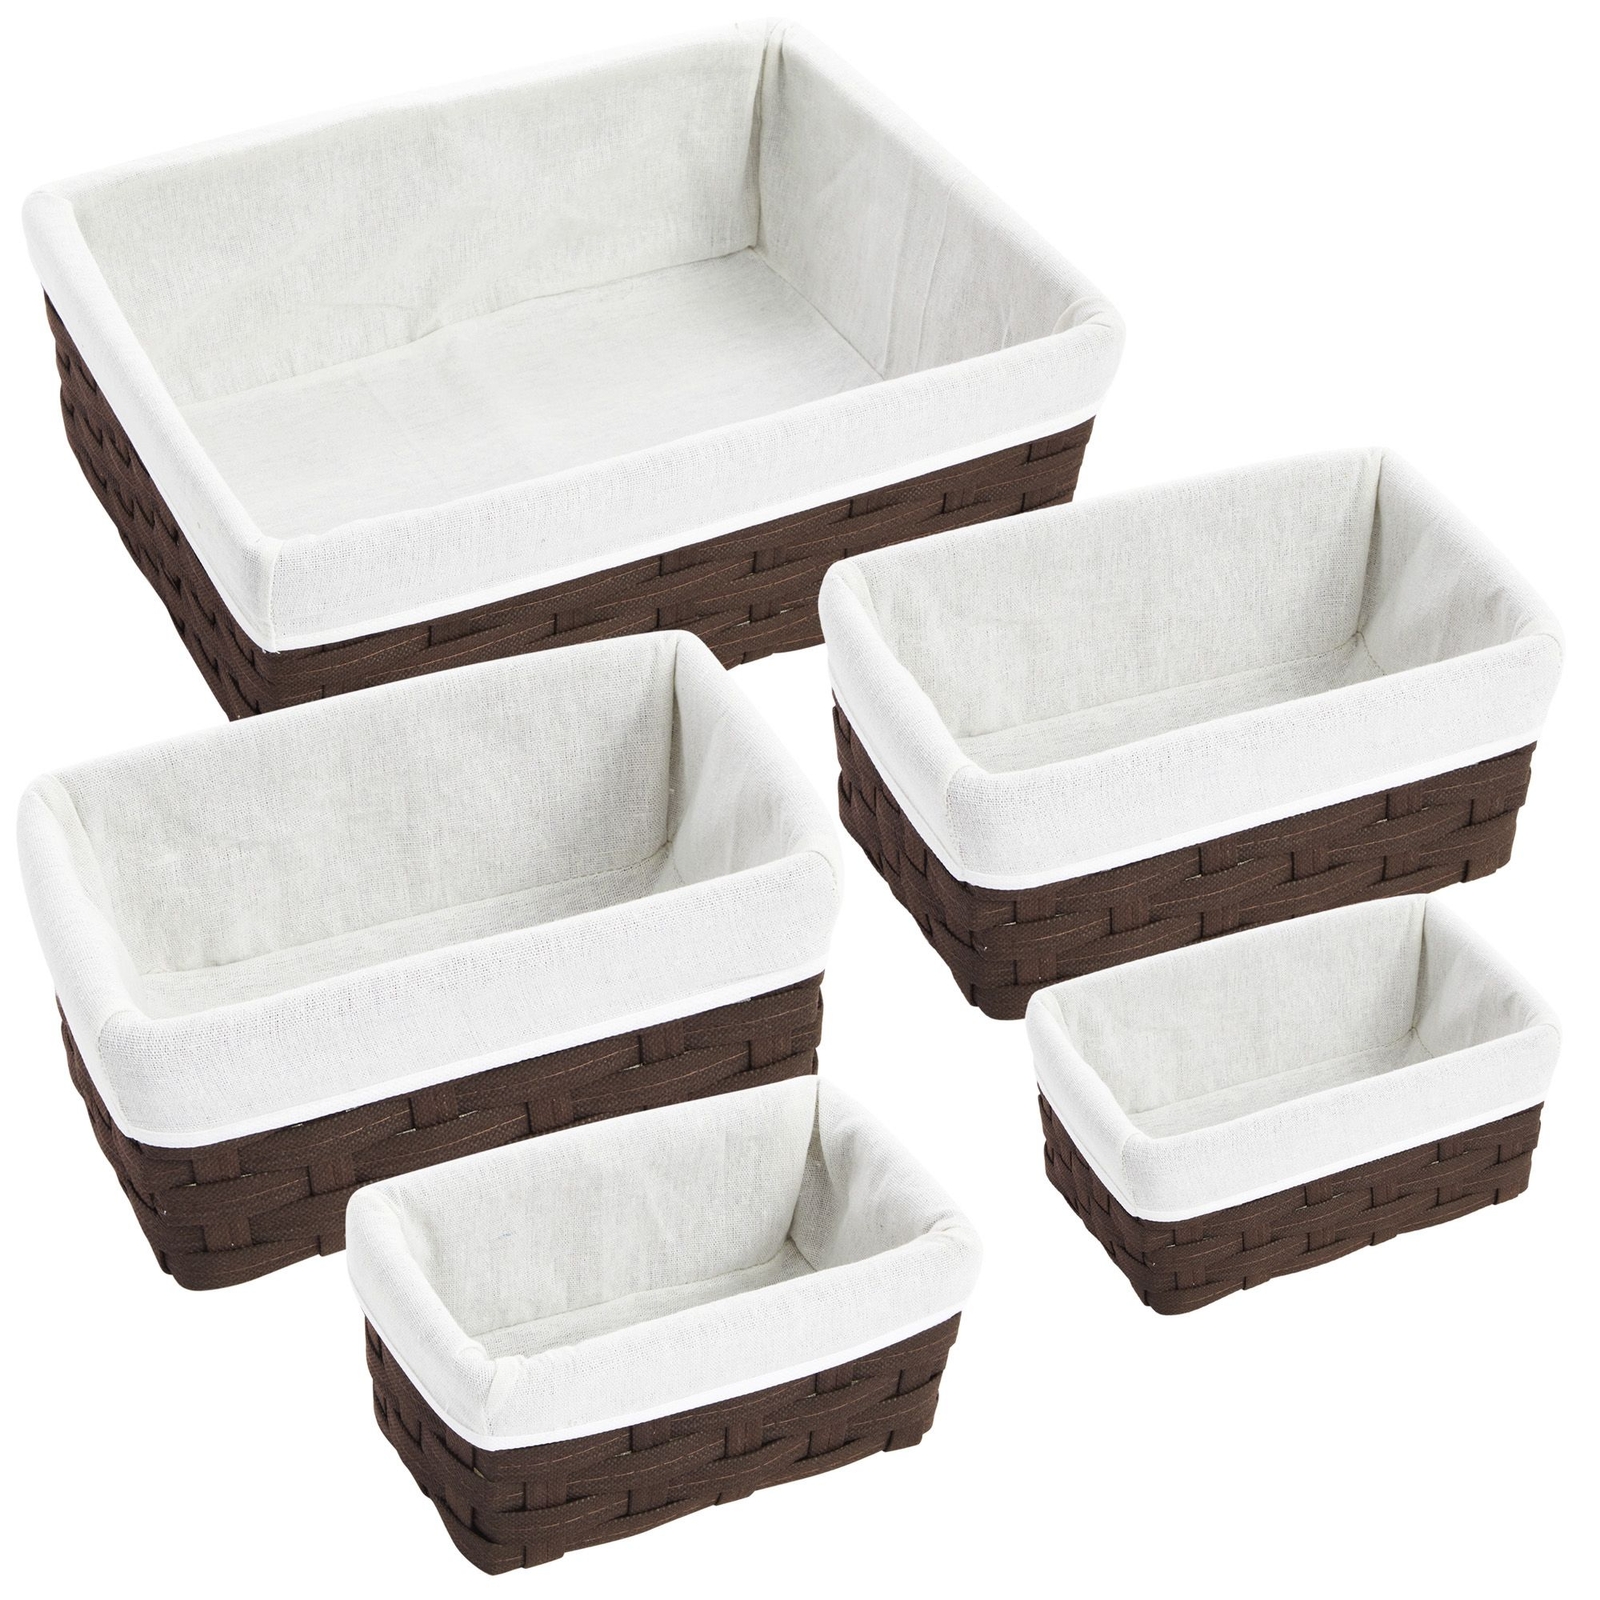 5 Pack Wicker Nesting Baskets with Cloth Lining for Pantry Shelves, Rectangular Storage Bins for Organizing Closet (Brown, 3 Sizes) - image 1 of 10